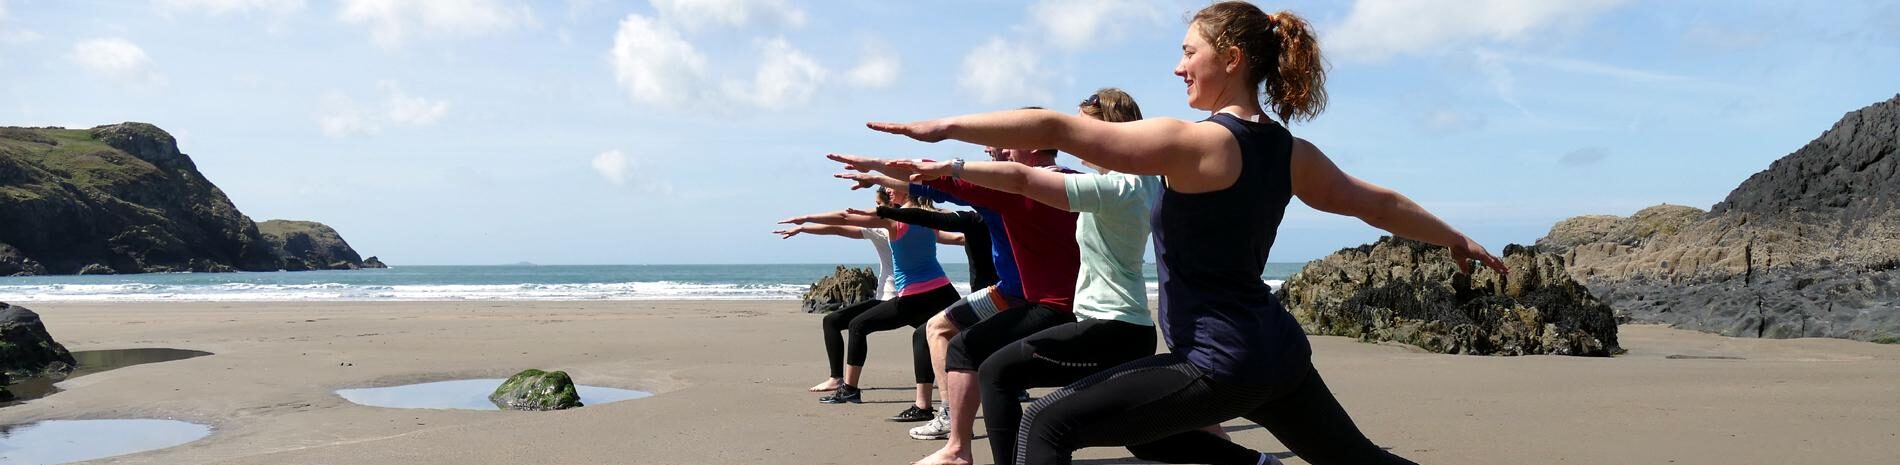 Fitness Holidays & Wellbeing Weekends for Adults & Singles in in